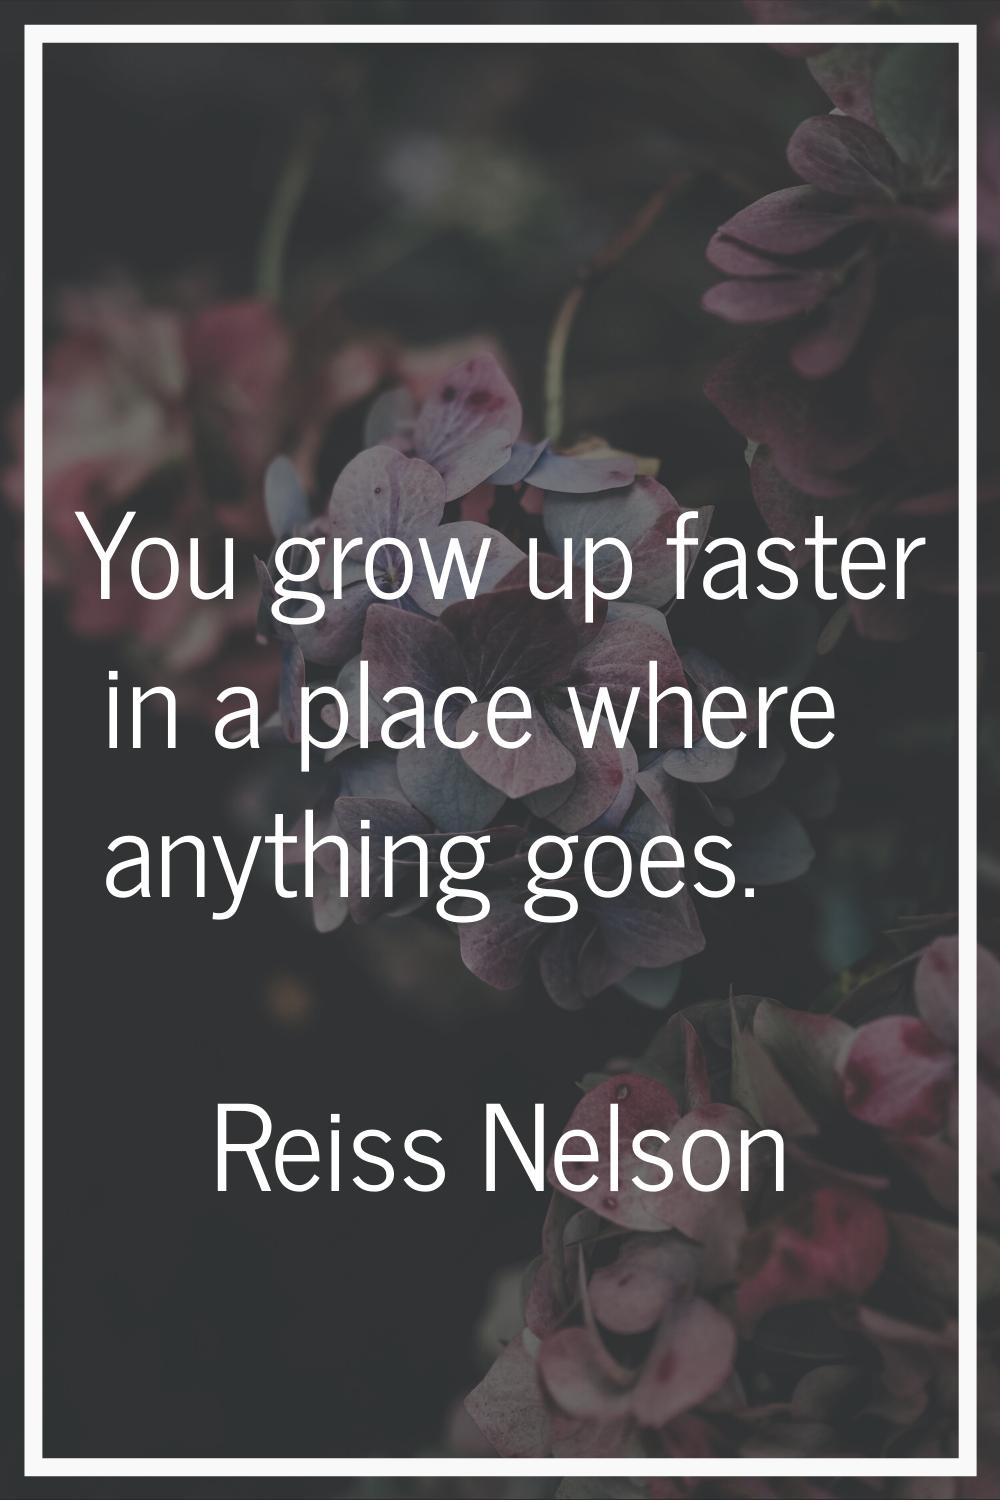 You grow up faster in a place where anything goes.